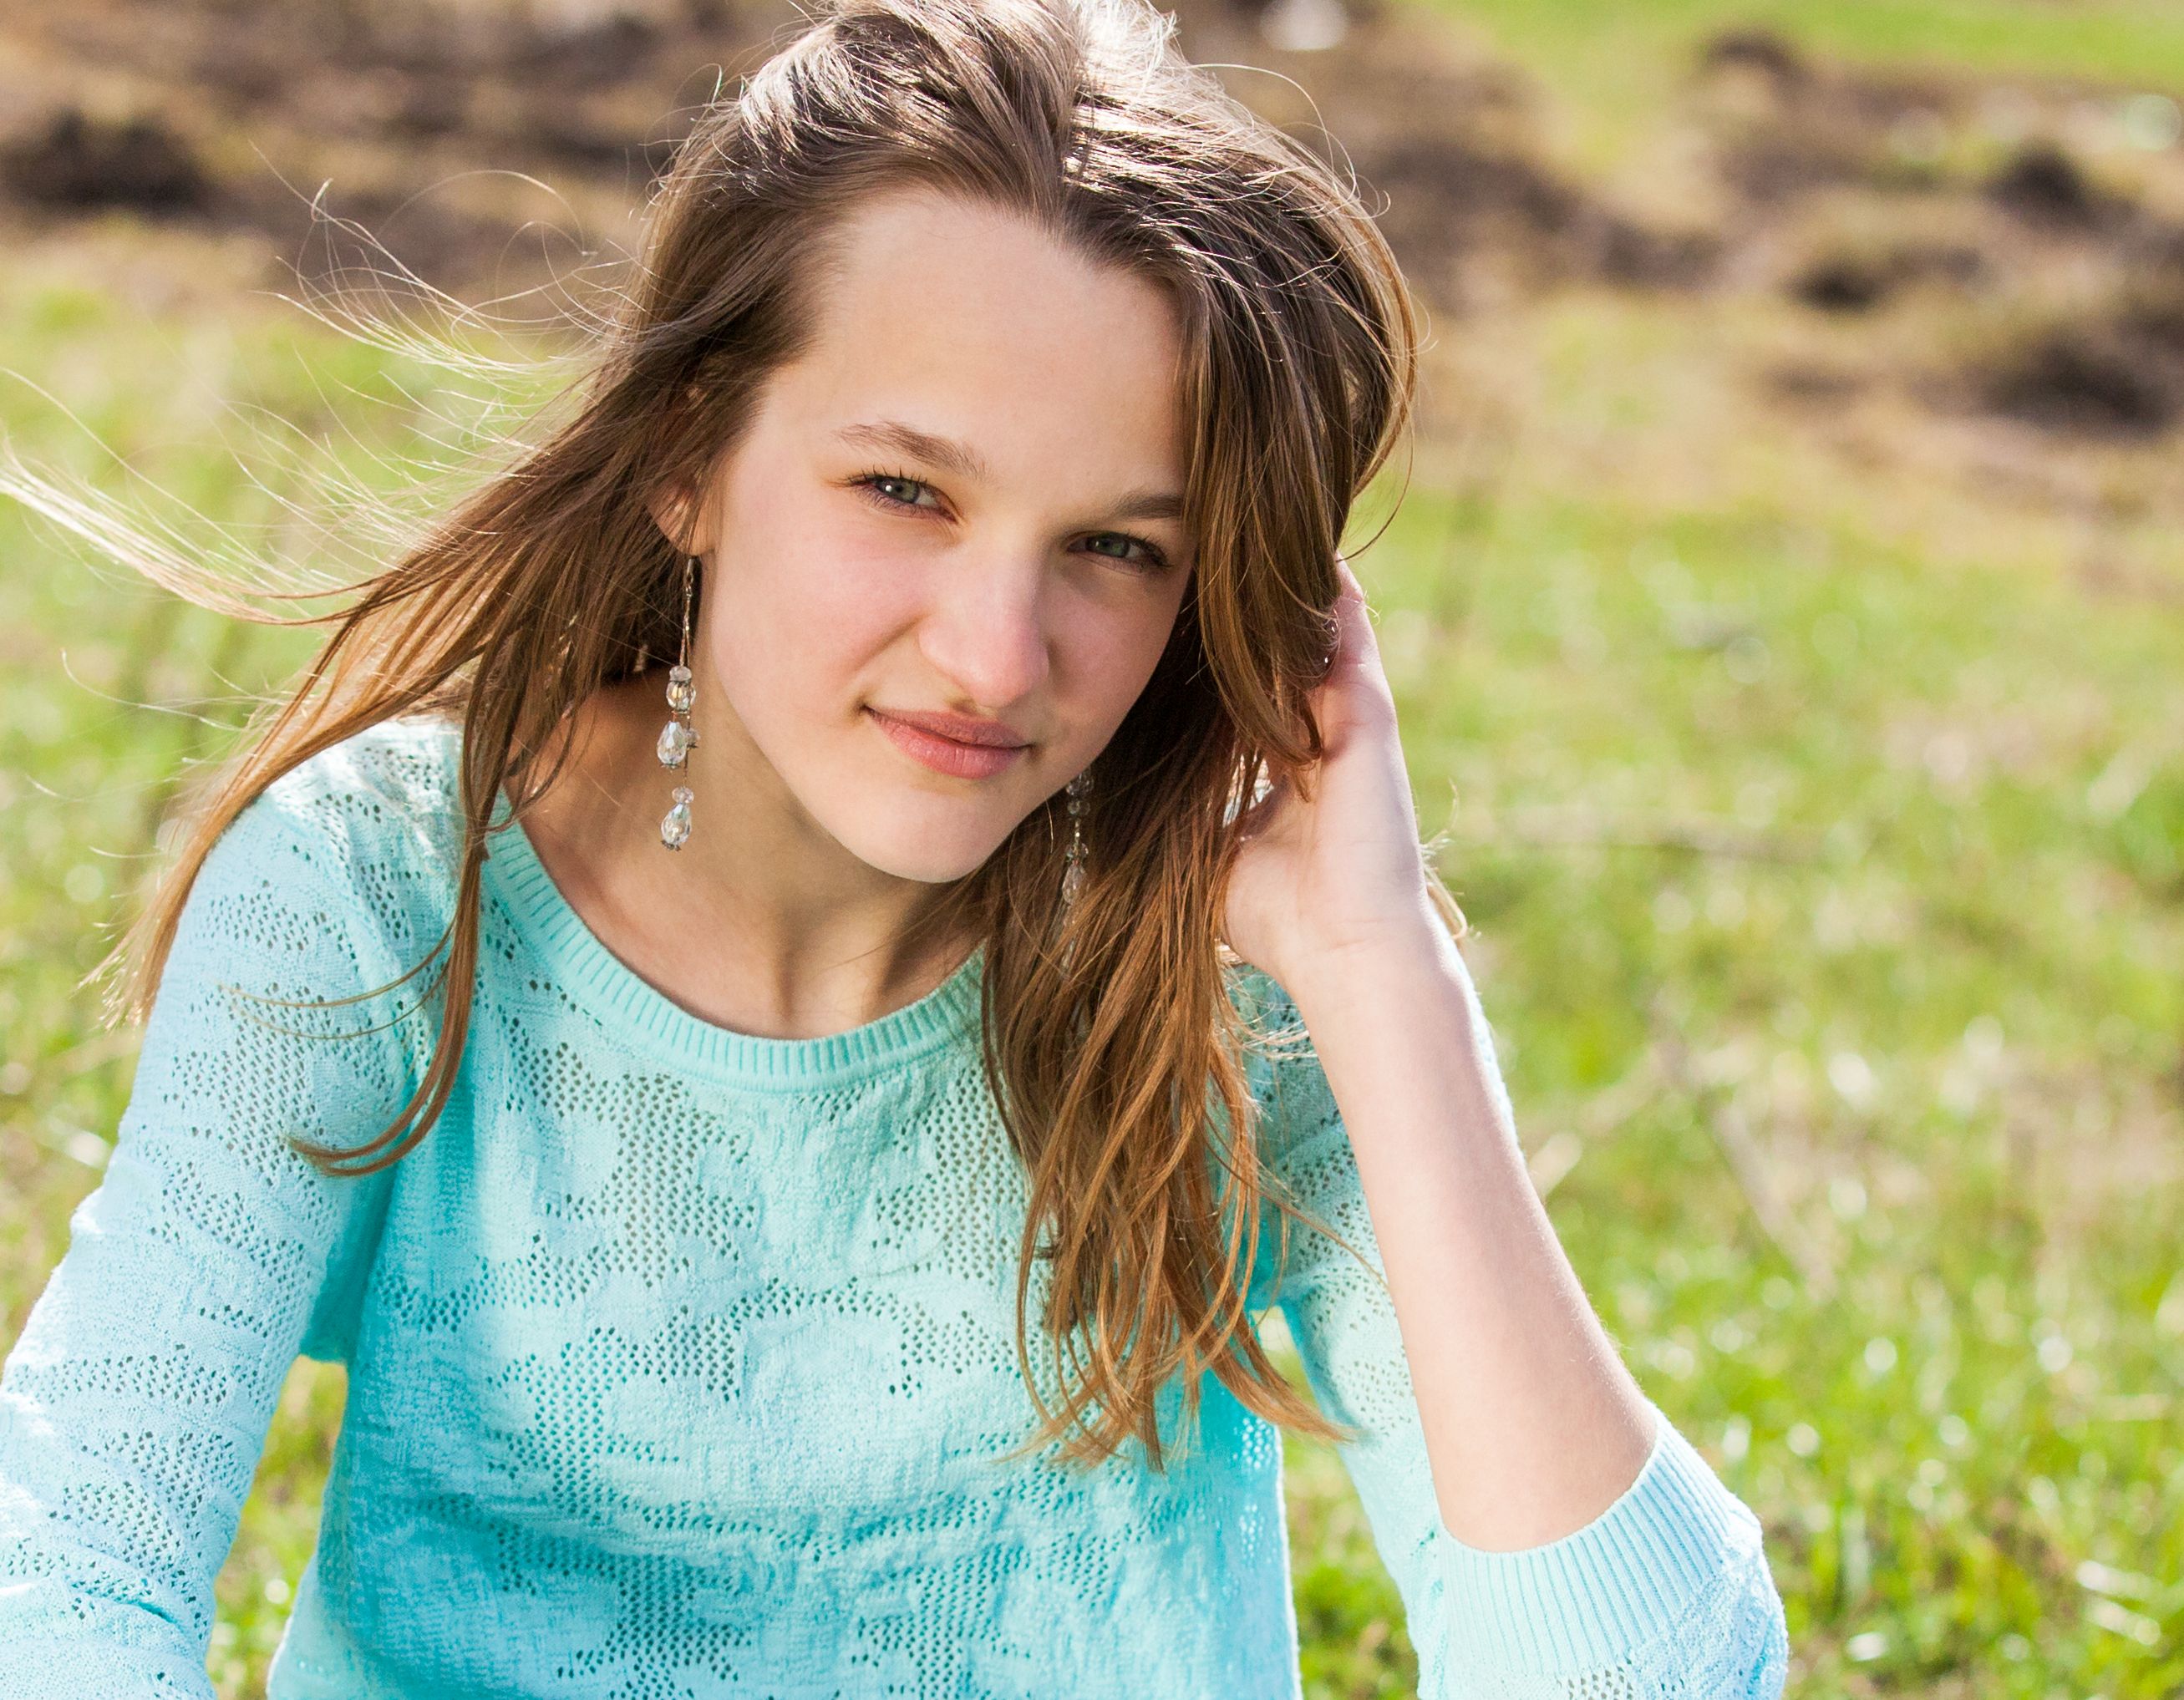 a 13-year-old Catholic girl photographed in April 2015, picture 3